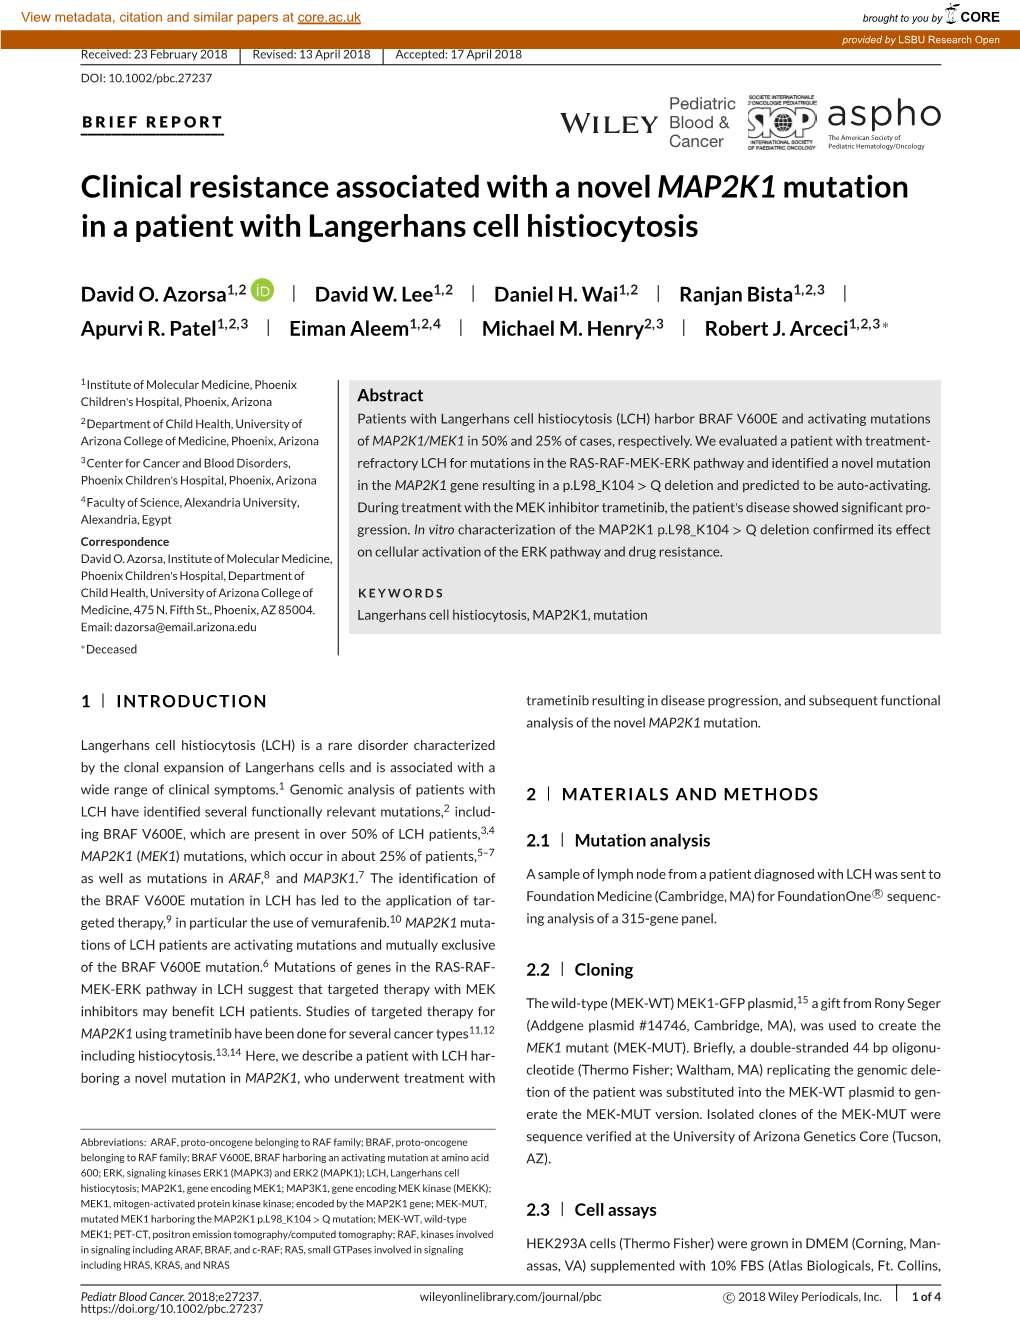 &lt;I&gt;MAP2K1&lt;/I&gt; Mutation in a Patient with Langerhans Cell Histiocytosis